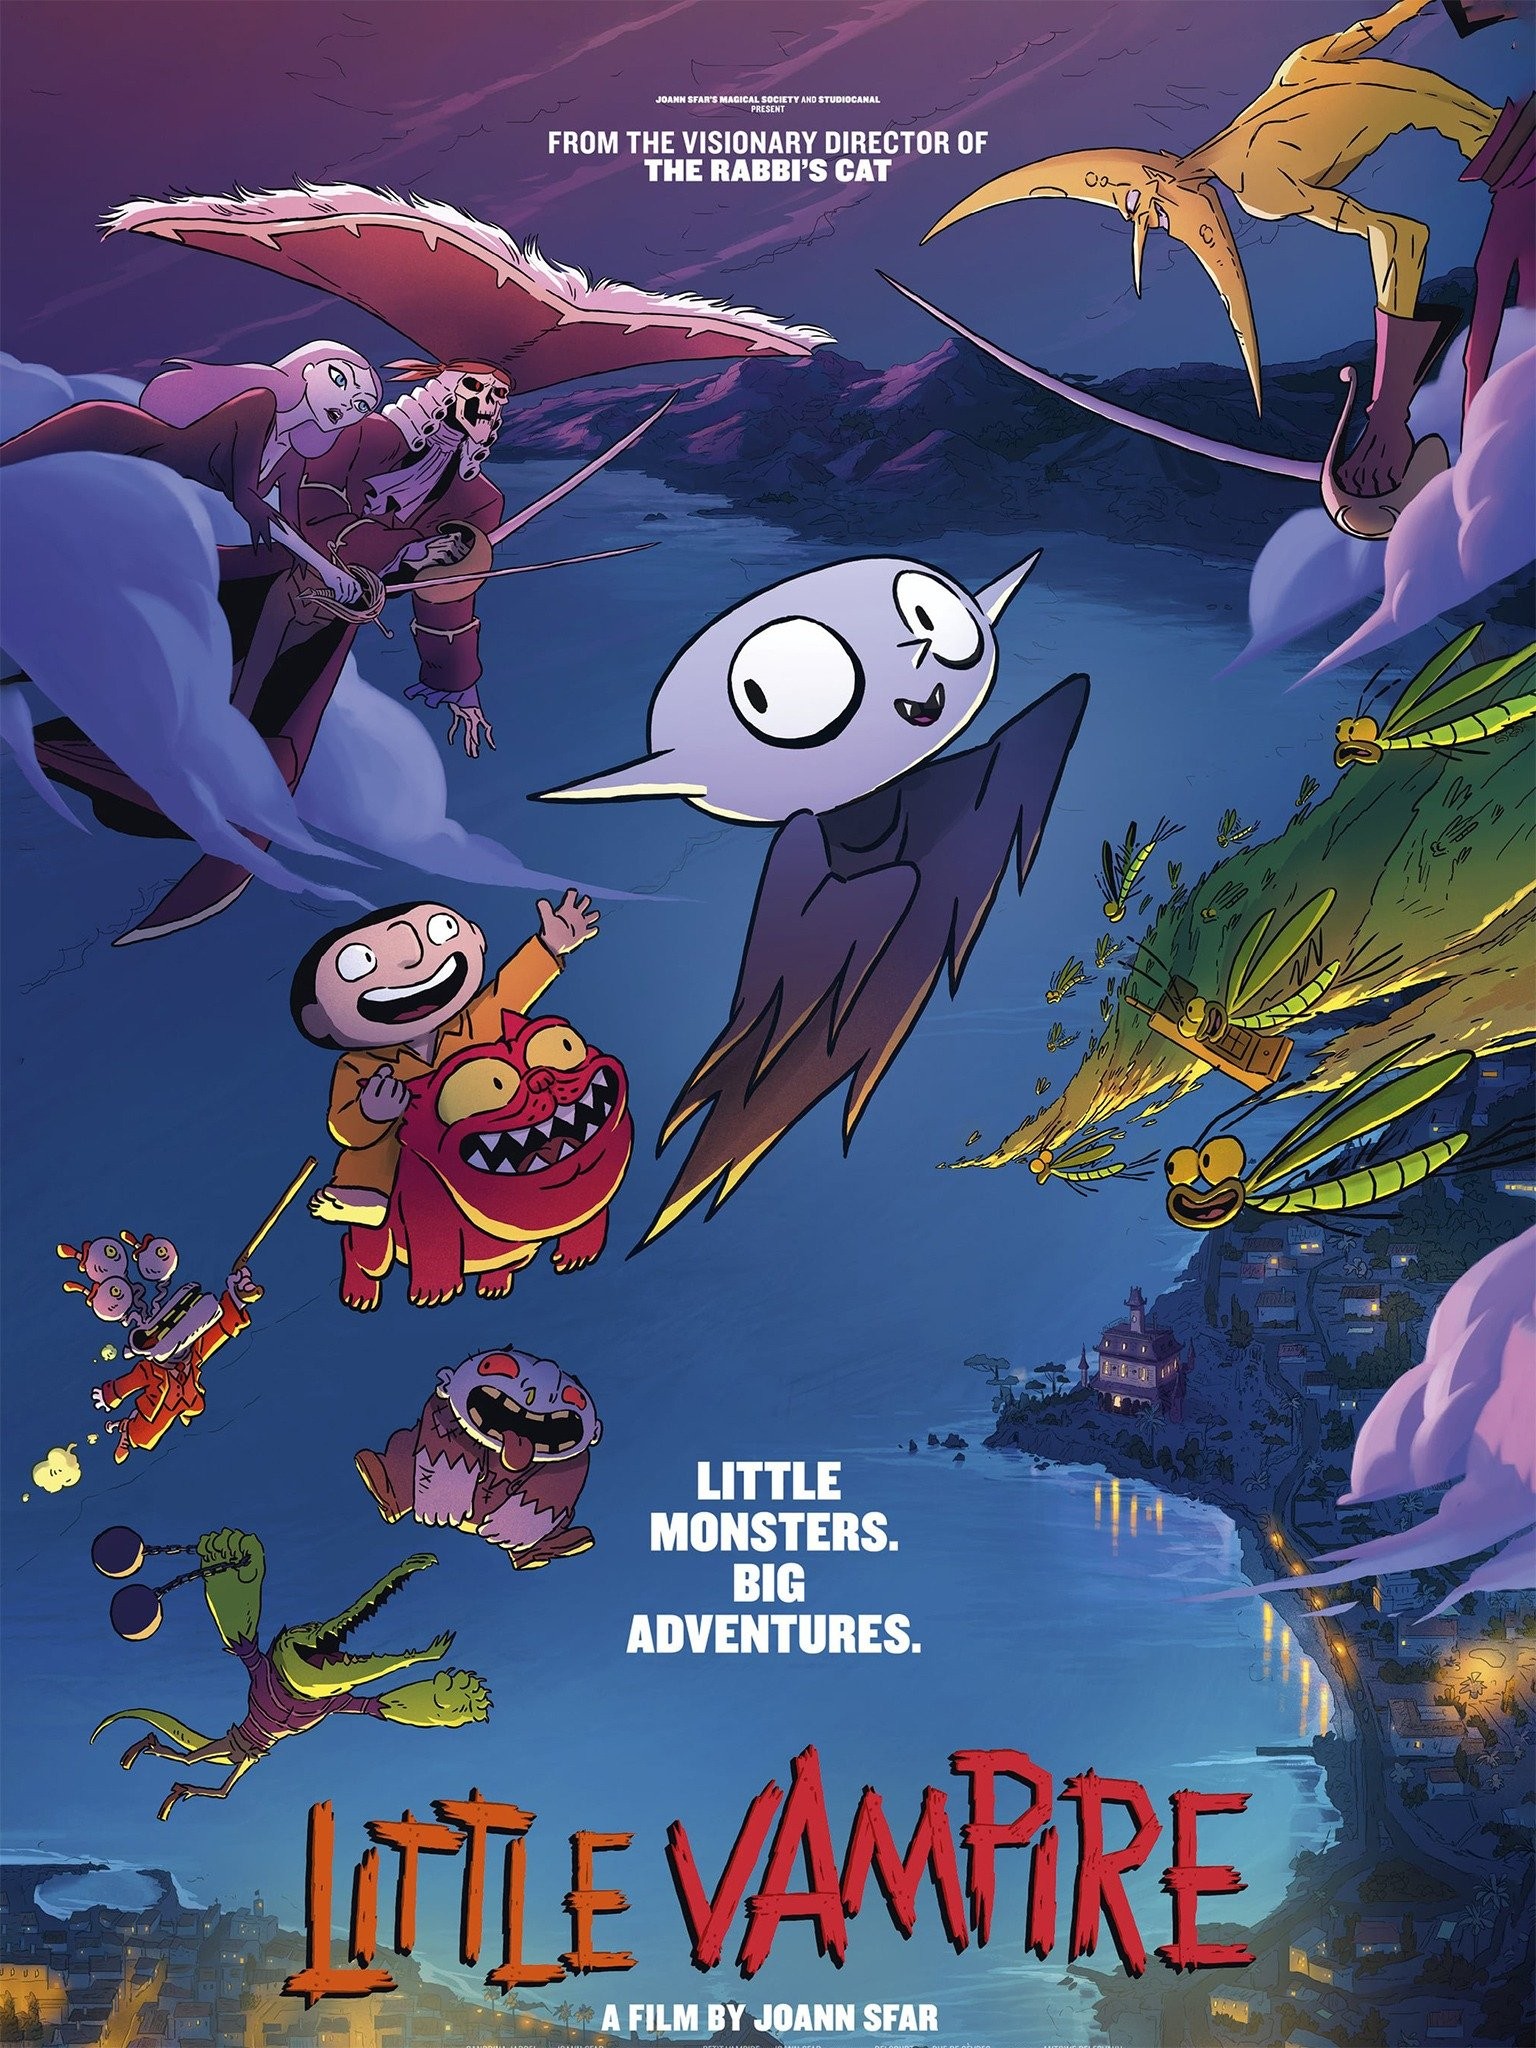 Shout! Factory to Issue Animated 'Little Vampire' Film on Digital